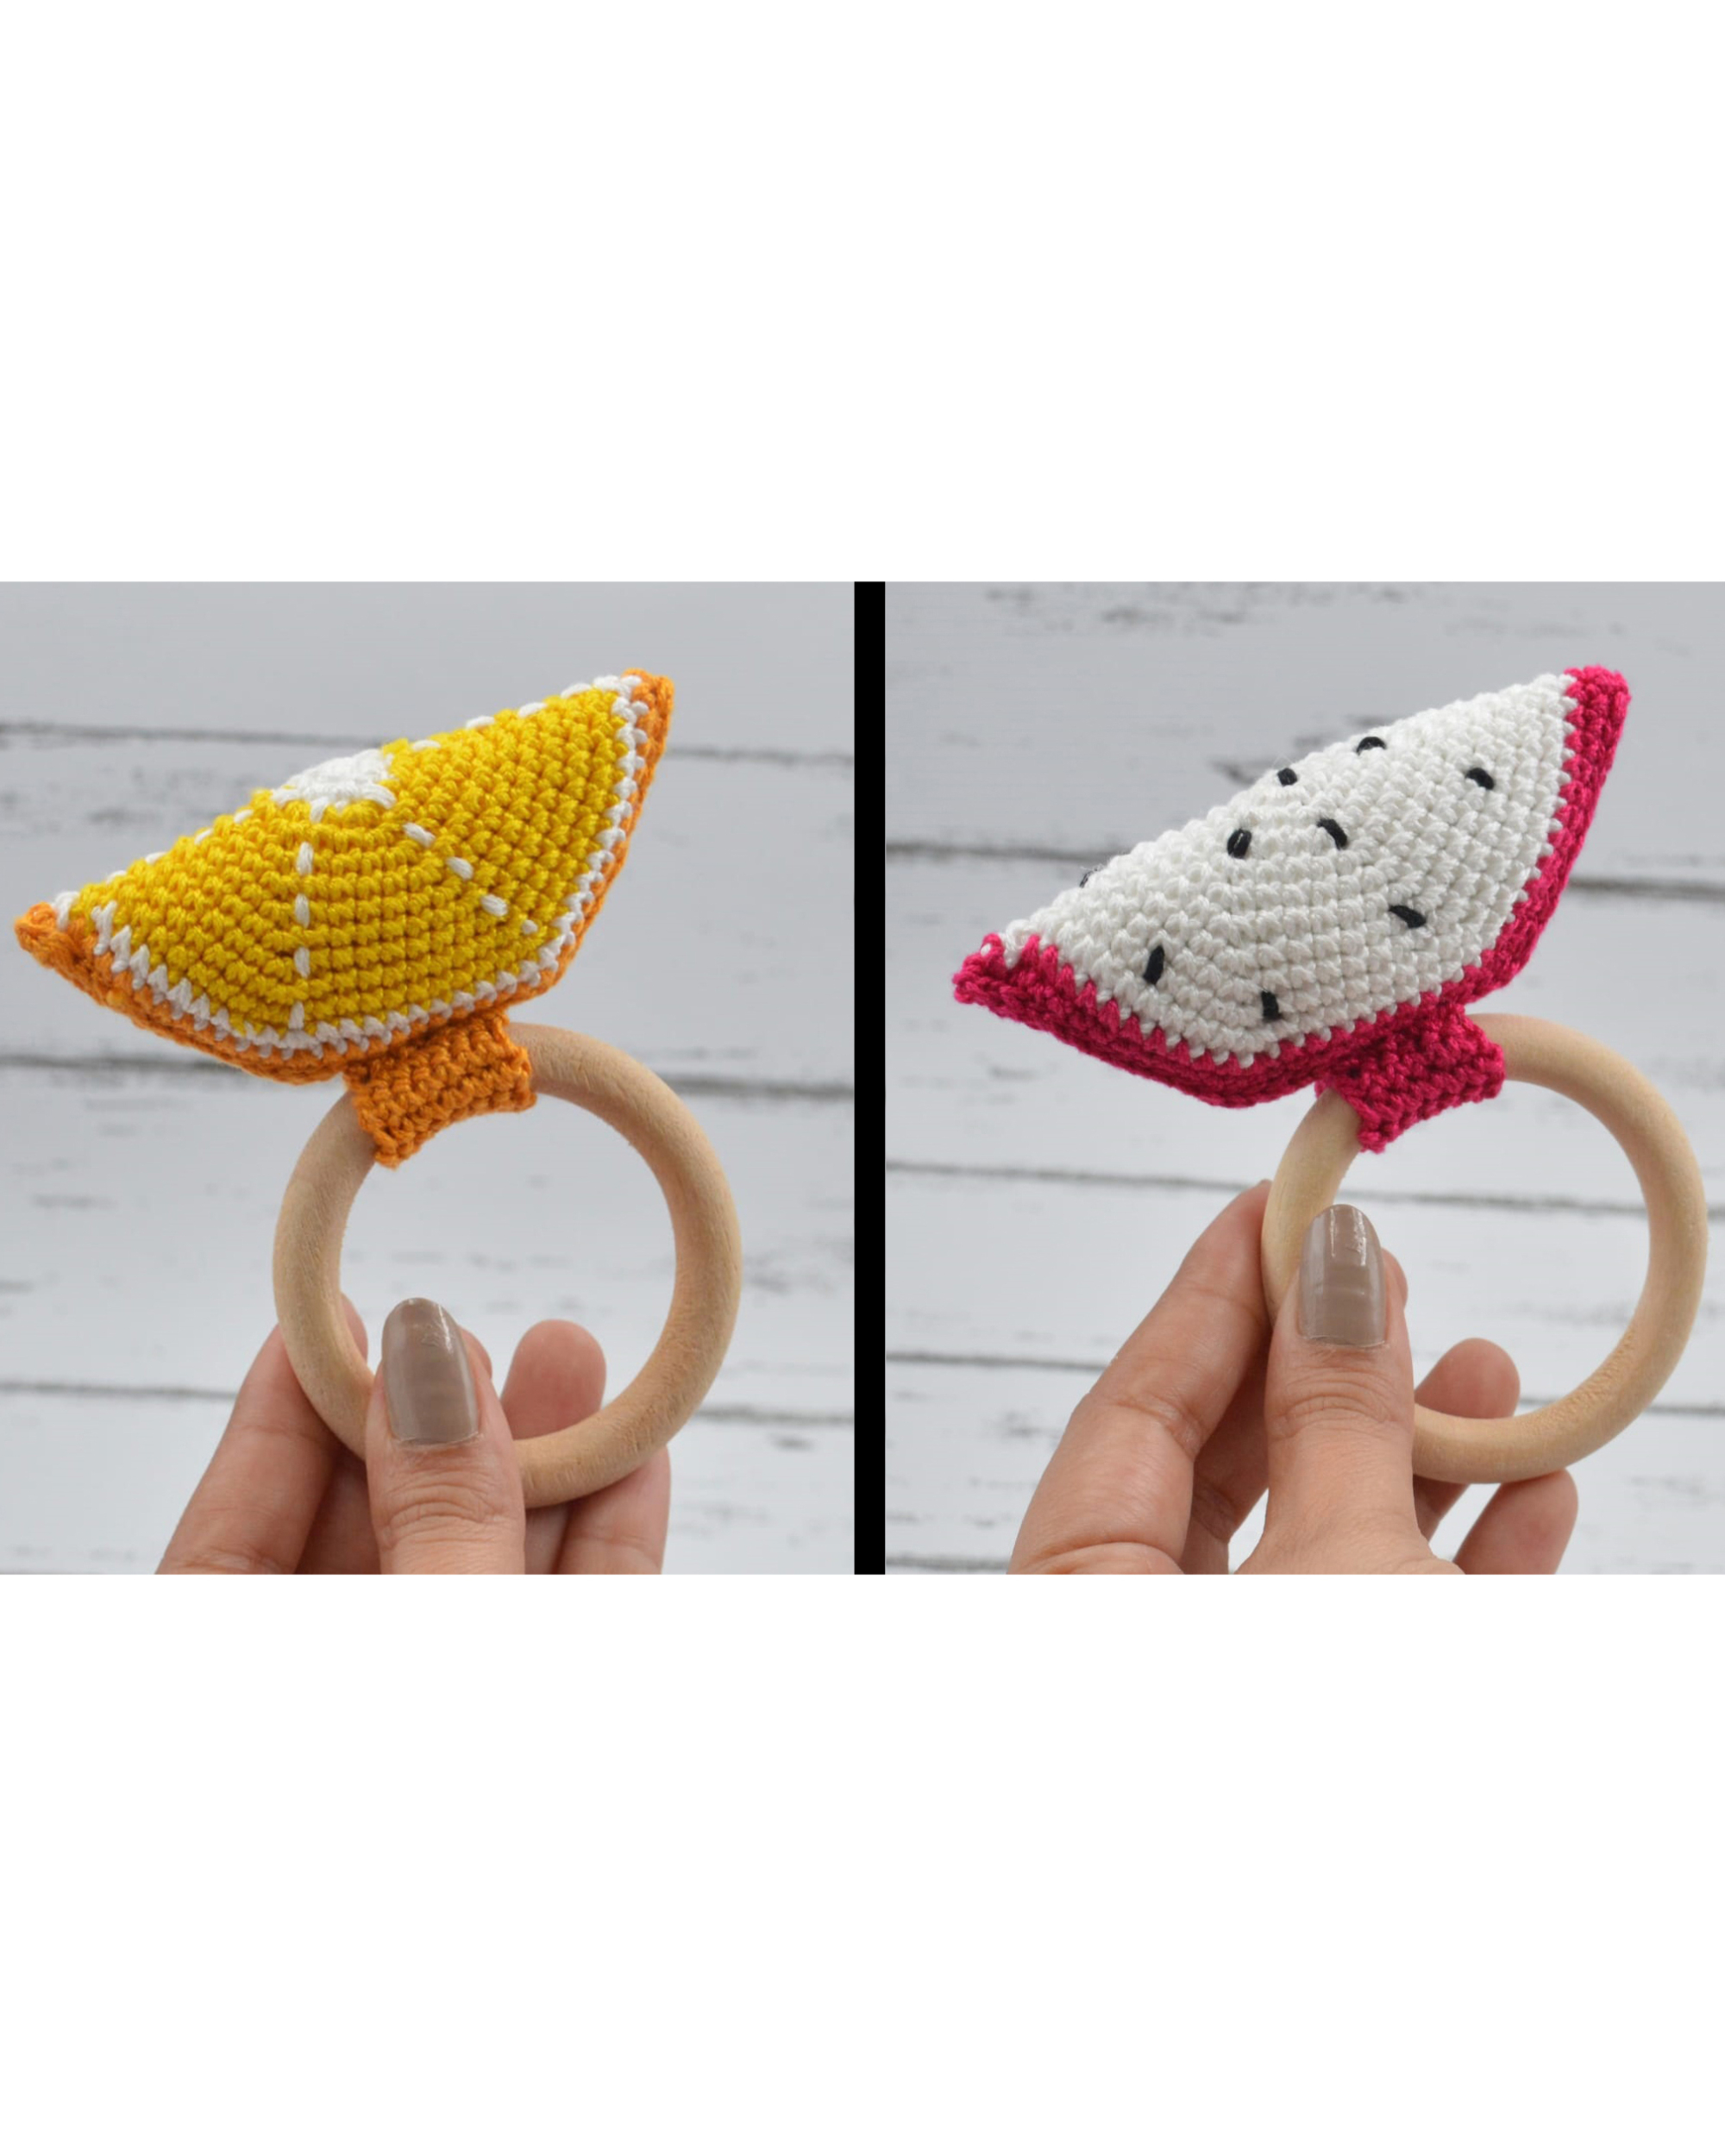 White and yellow hand crochet fruit rattle - set of two